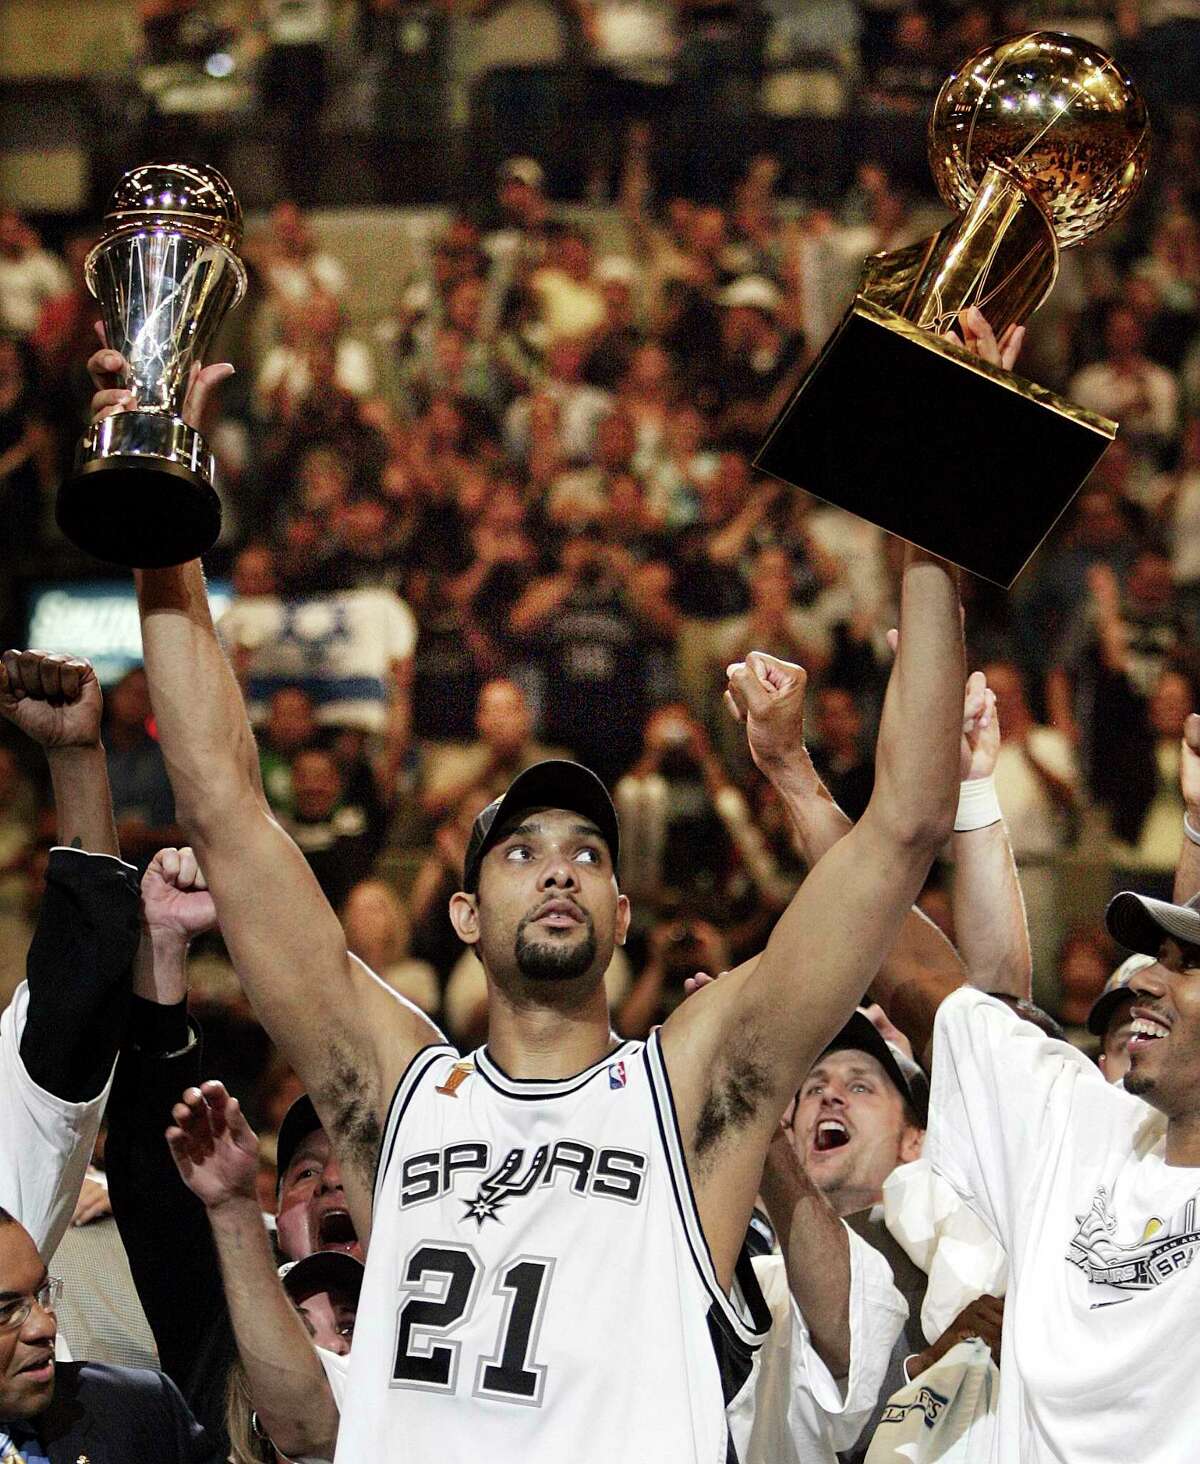 Spurs great Tim Duncan celebrates the 2005 championship and MVP. Duncan filled up the stat sheet, but he led with the heart of a champion.